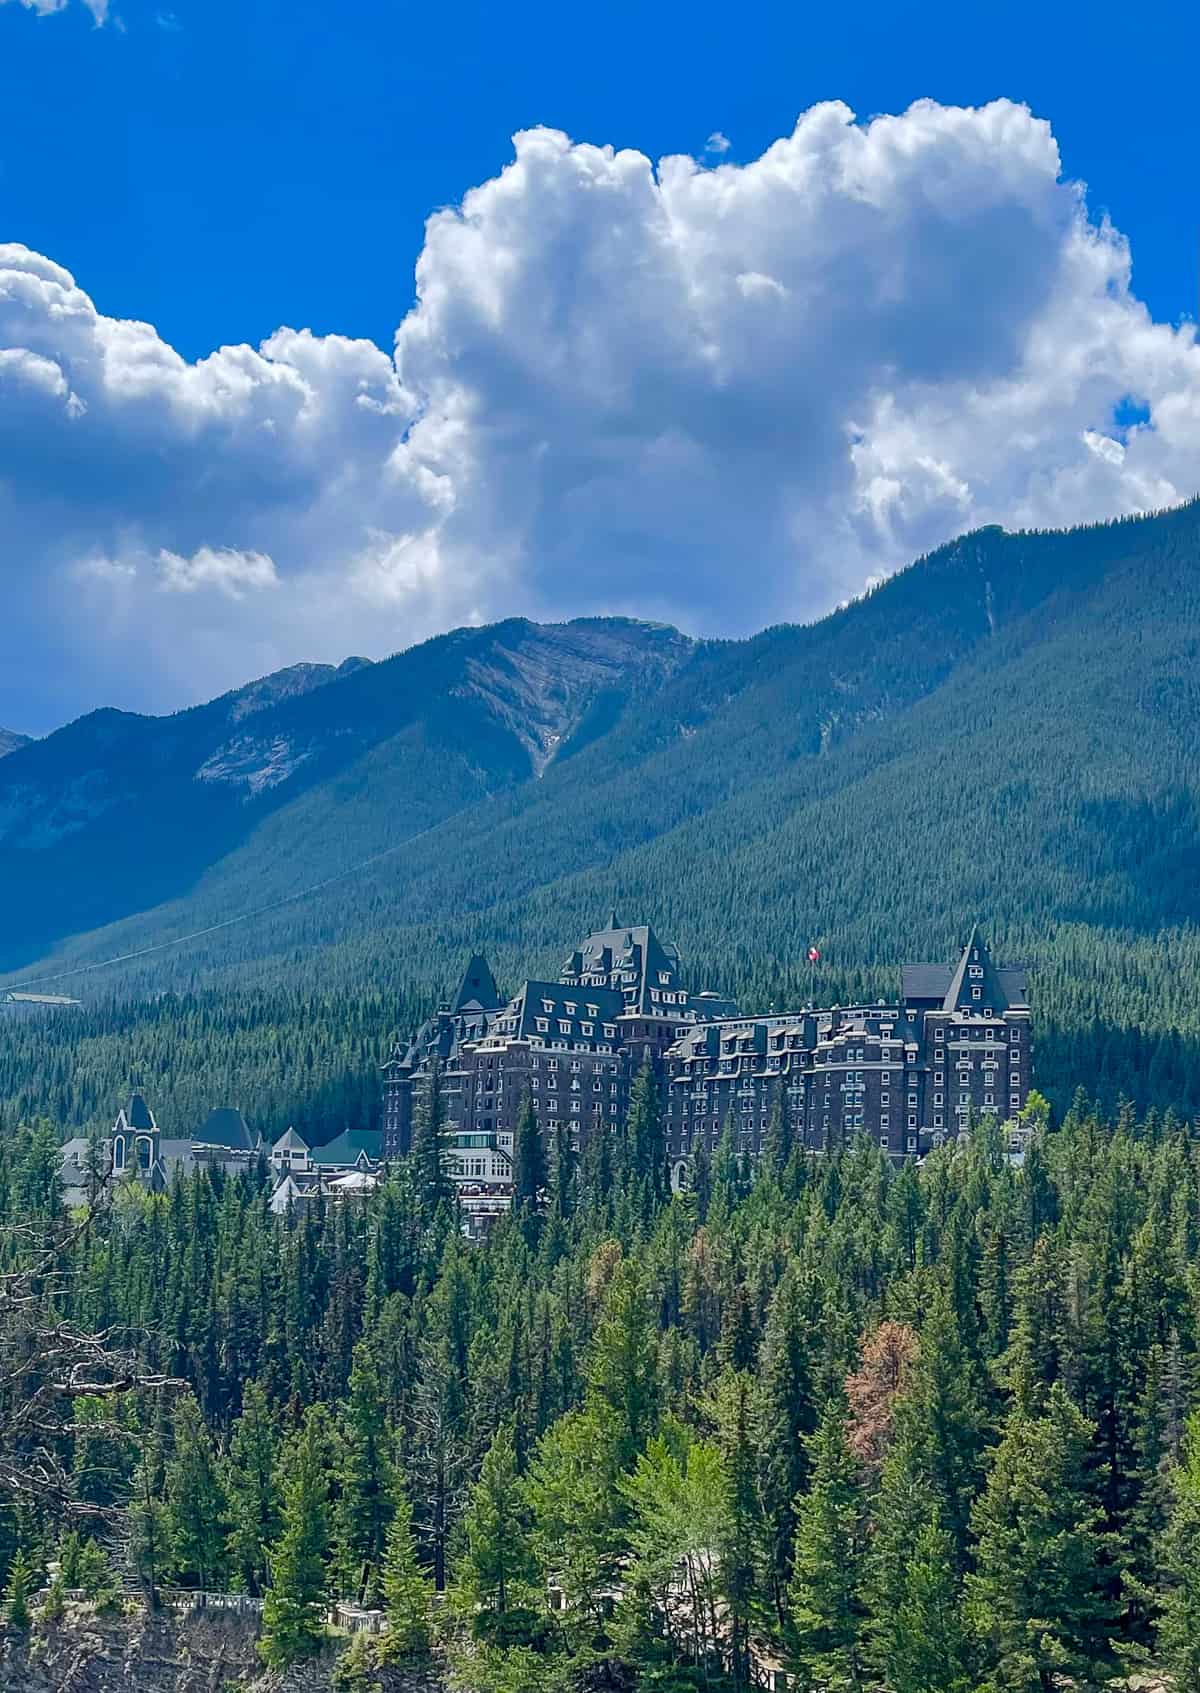 The Fairmont Castle Hotel in the mountains.